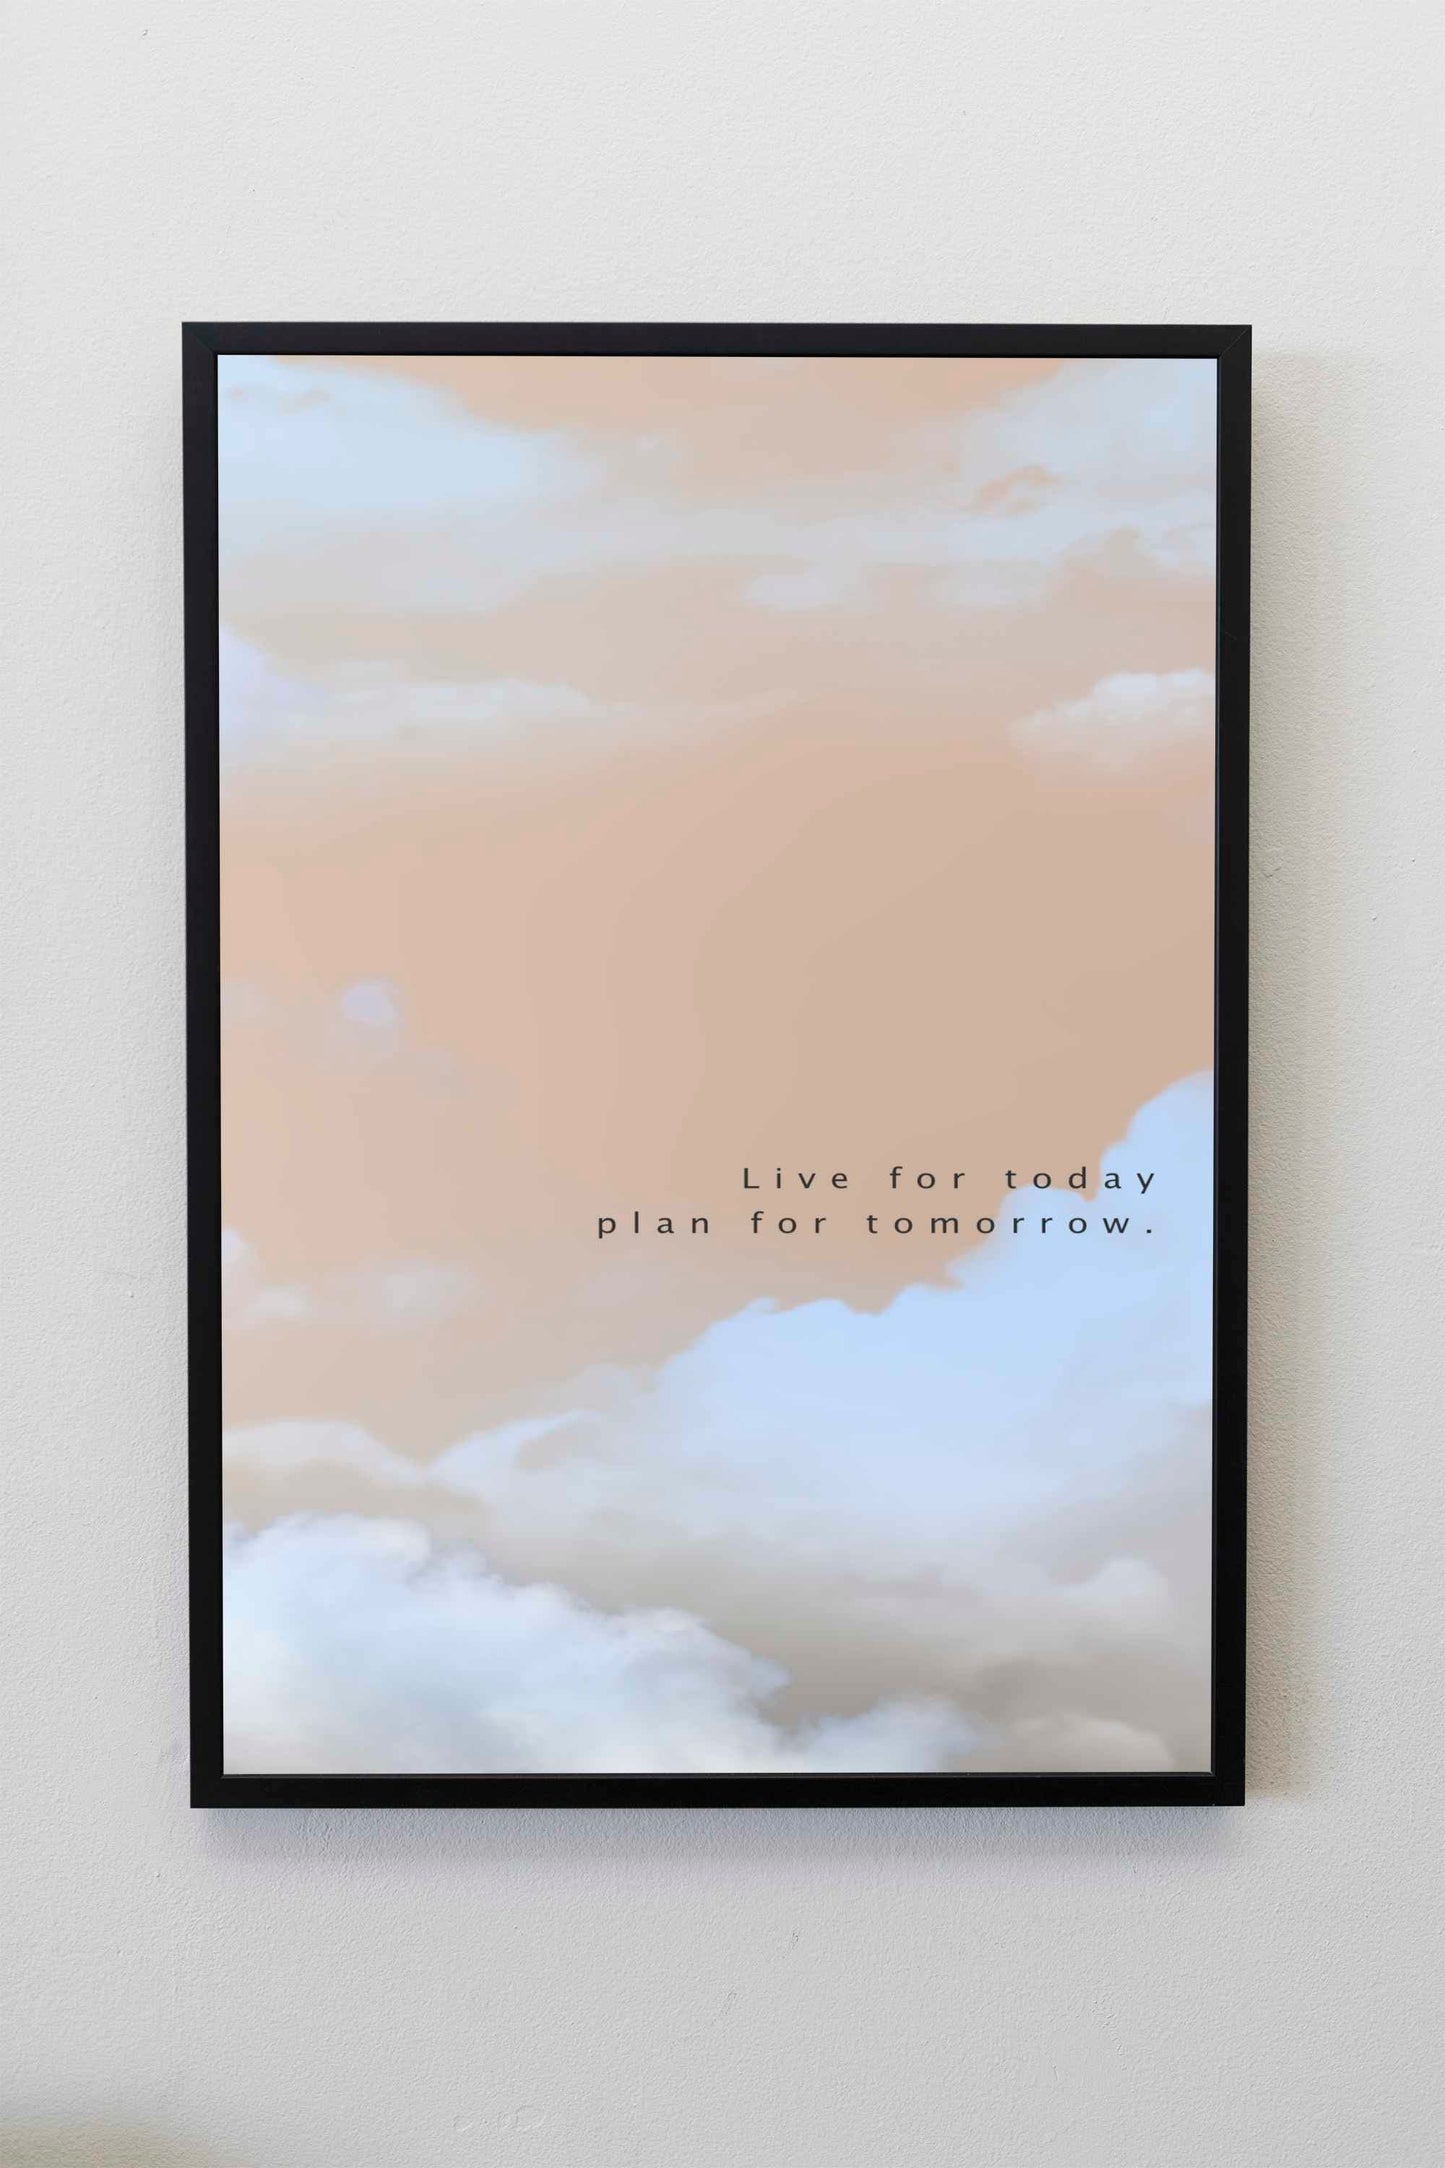 Live for today plan for tomorrow Quote Print | Inspirational Quotes | Motivational Prints | Manifestation Print | Aesthetic Room Decor